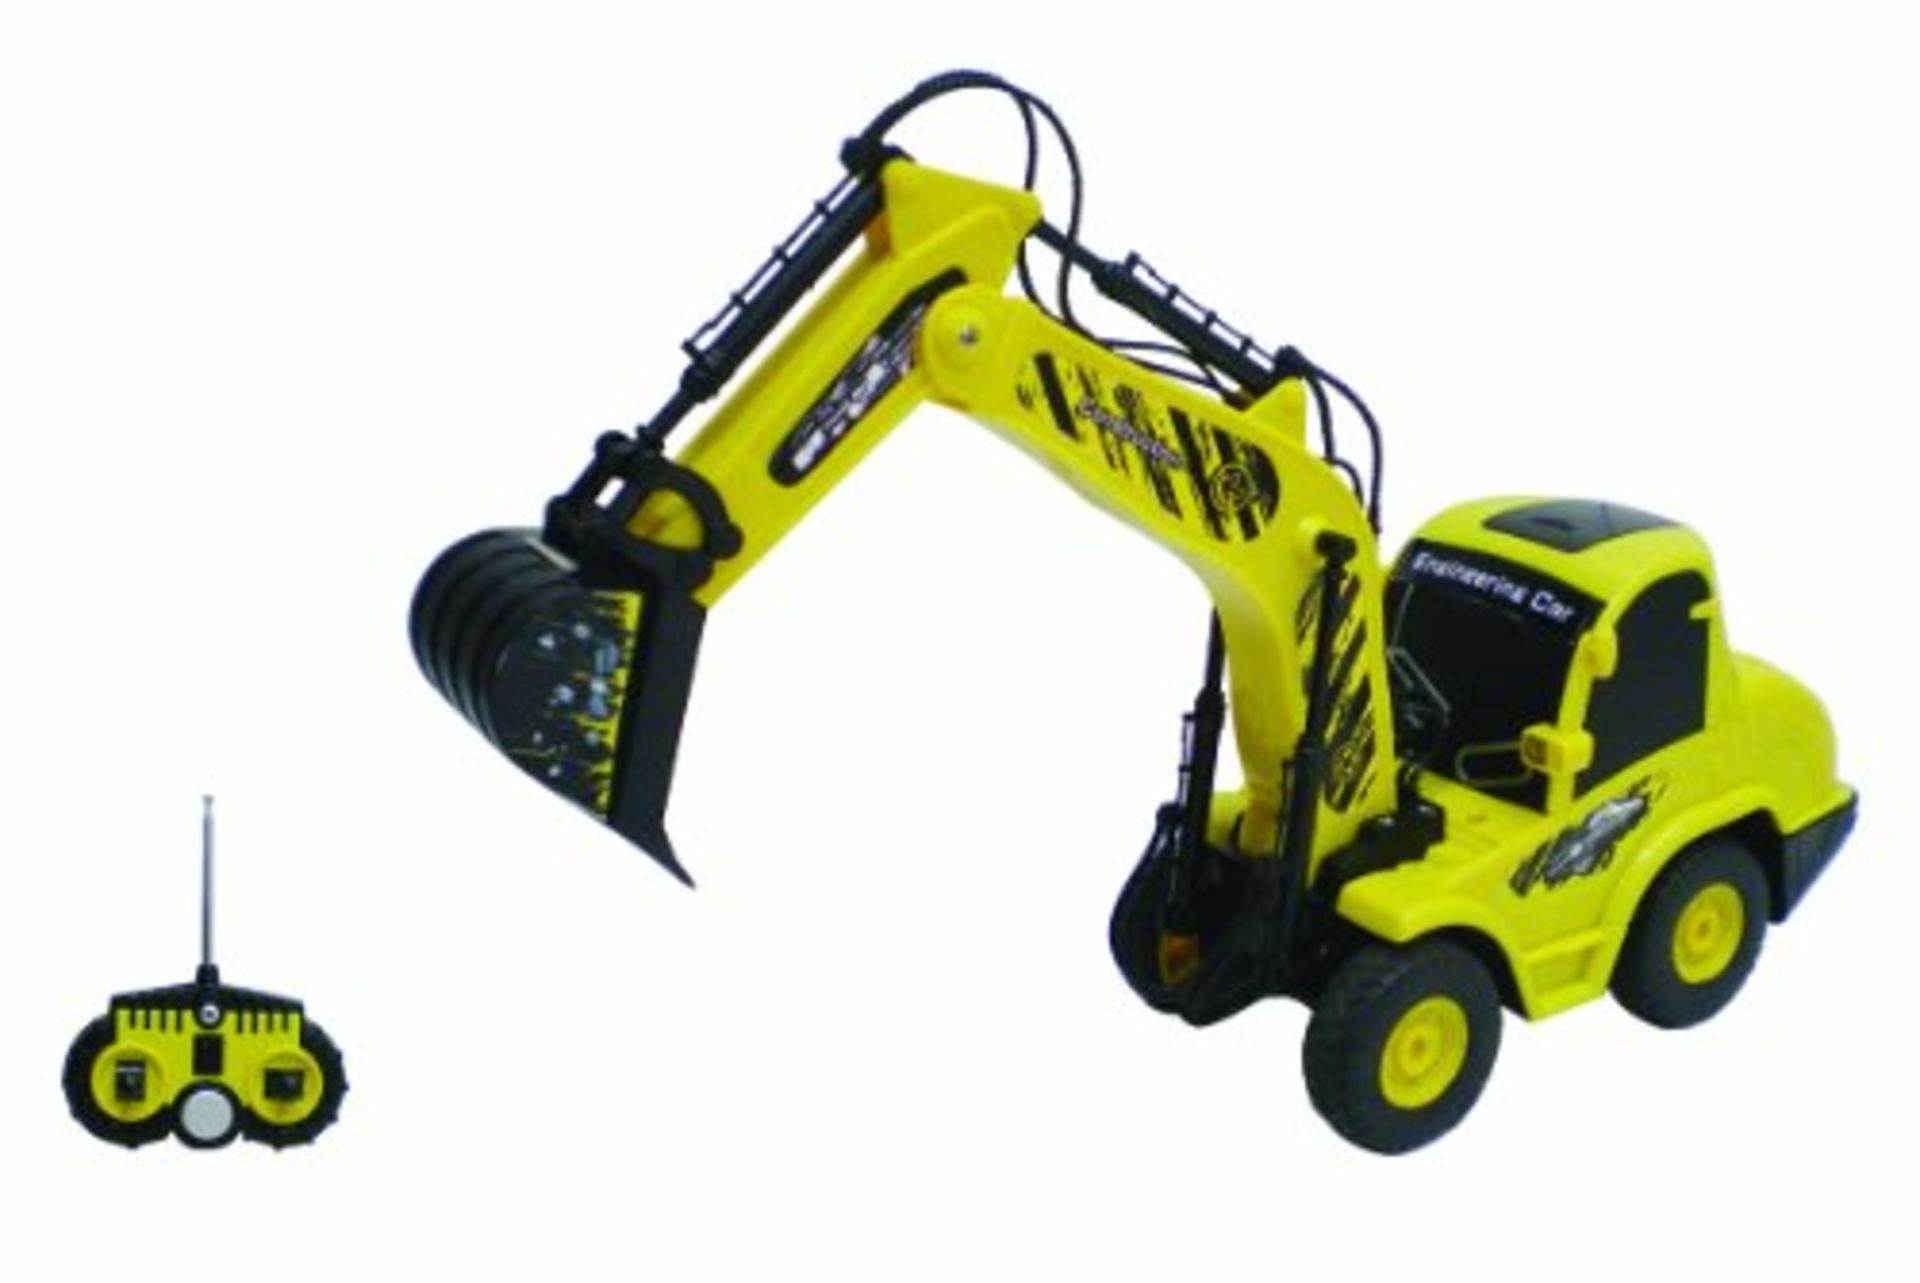 V *TRADE QTY* Brand New Yellow 1:20 Radio Controlled Construction Vehicle (Reach Arm) X 8 YOUR BID